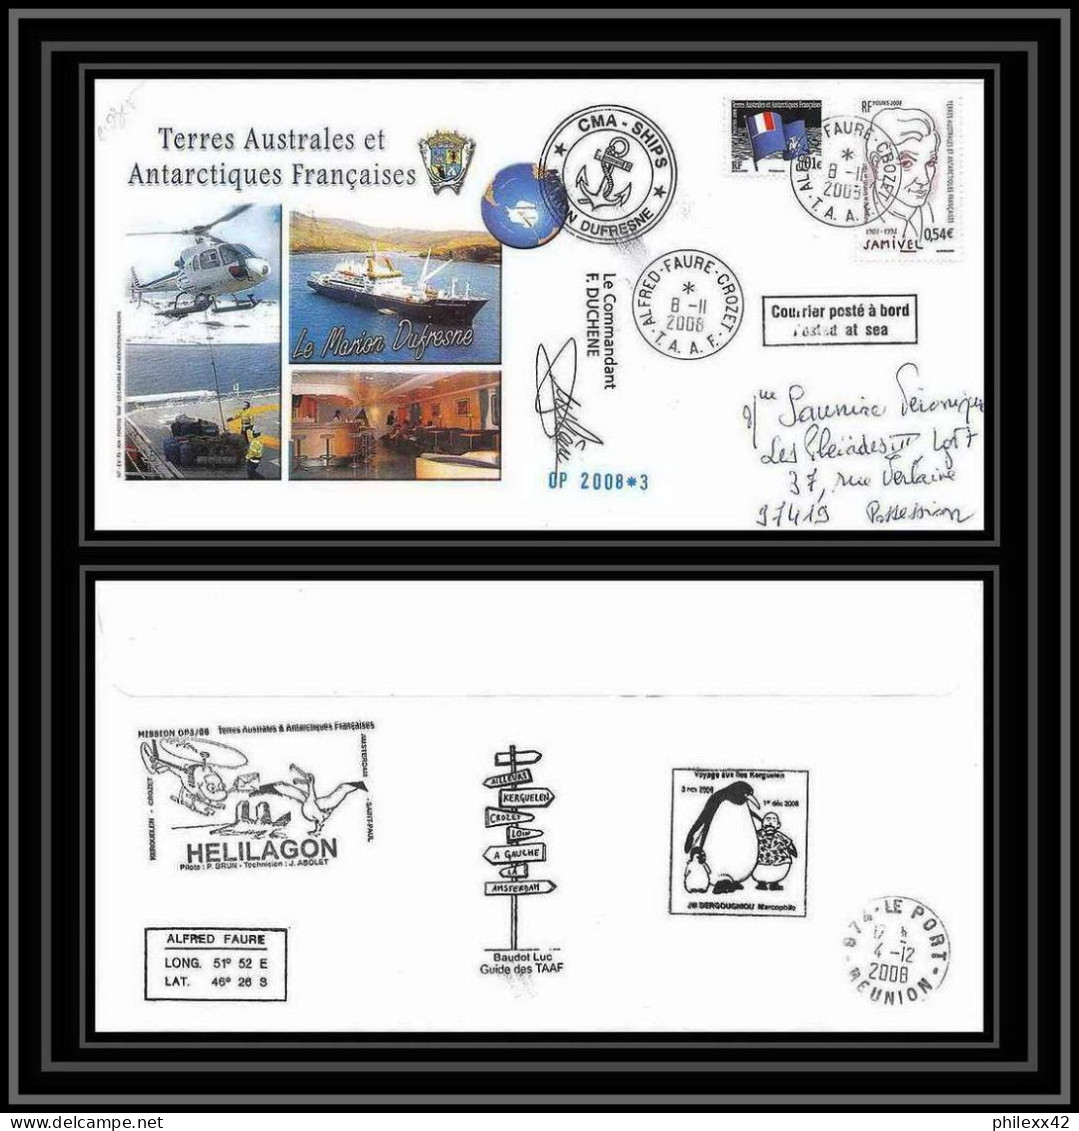 2843 ANTARCTIC Terres Australes TAAF Helilagon Lettre Cover Dufresne Signé Signed Op 2008/3 Crozet 8/11/2008 N°513 - Hélicoptères